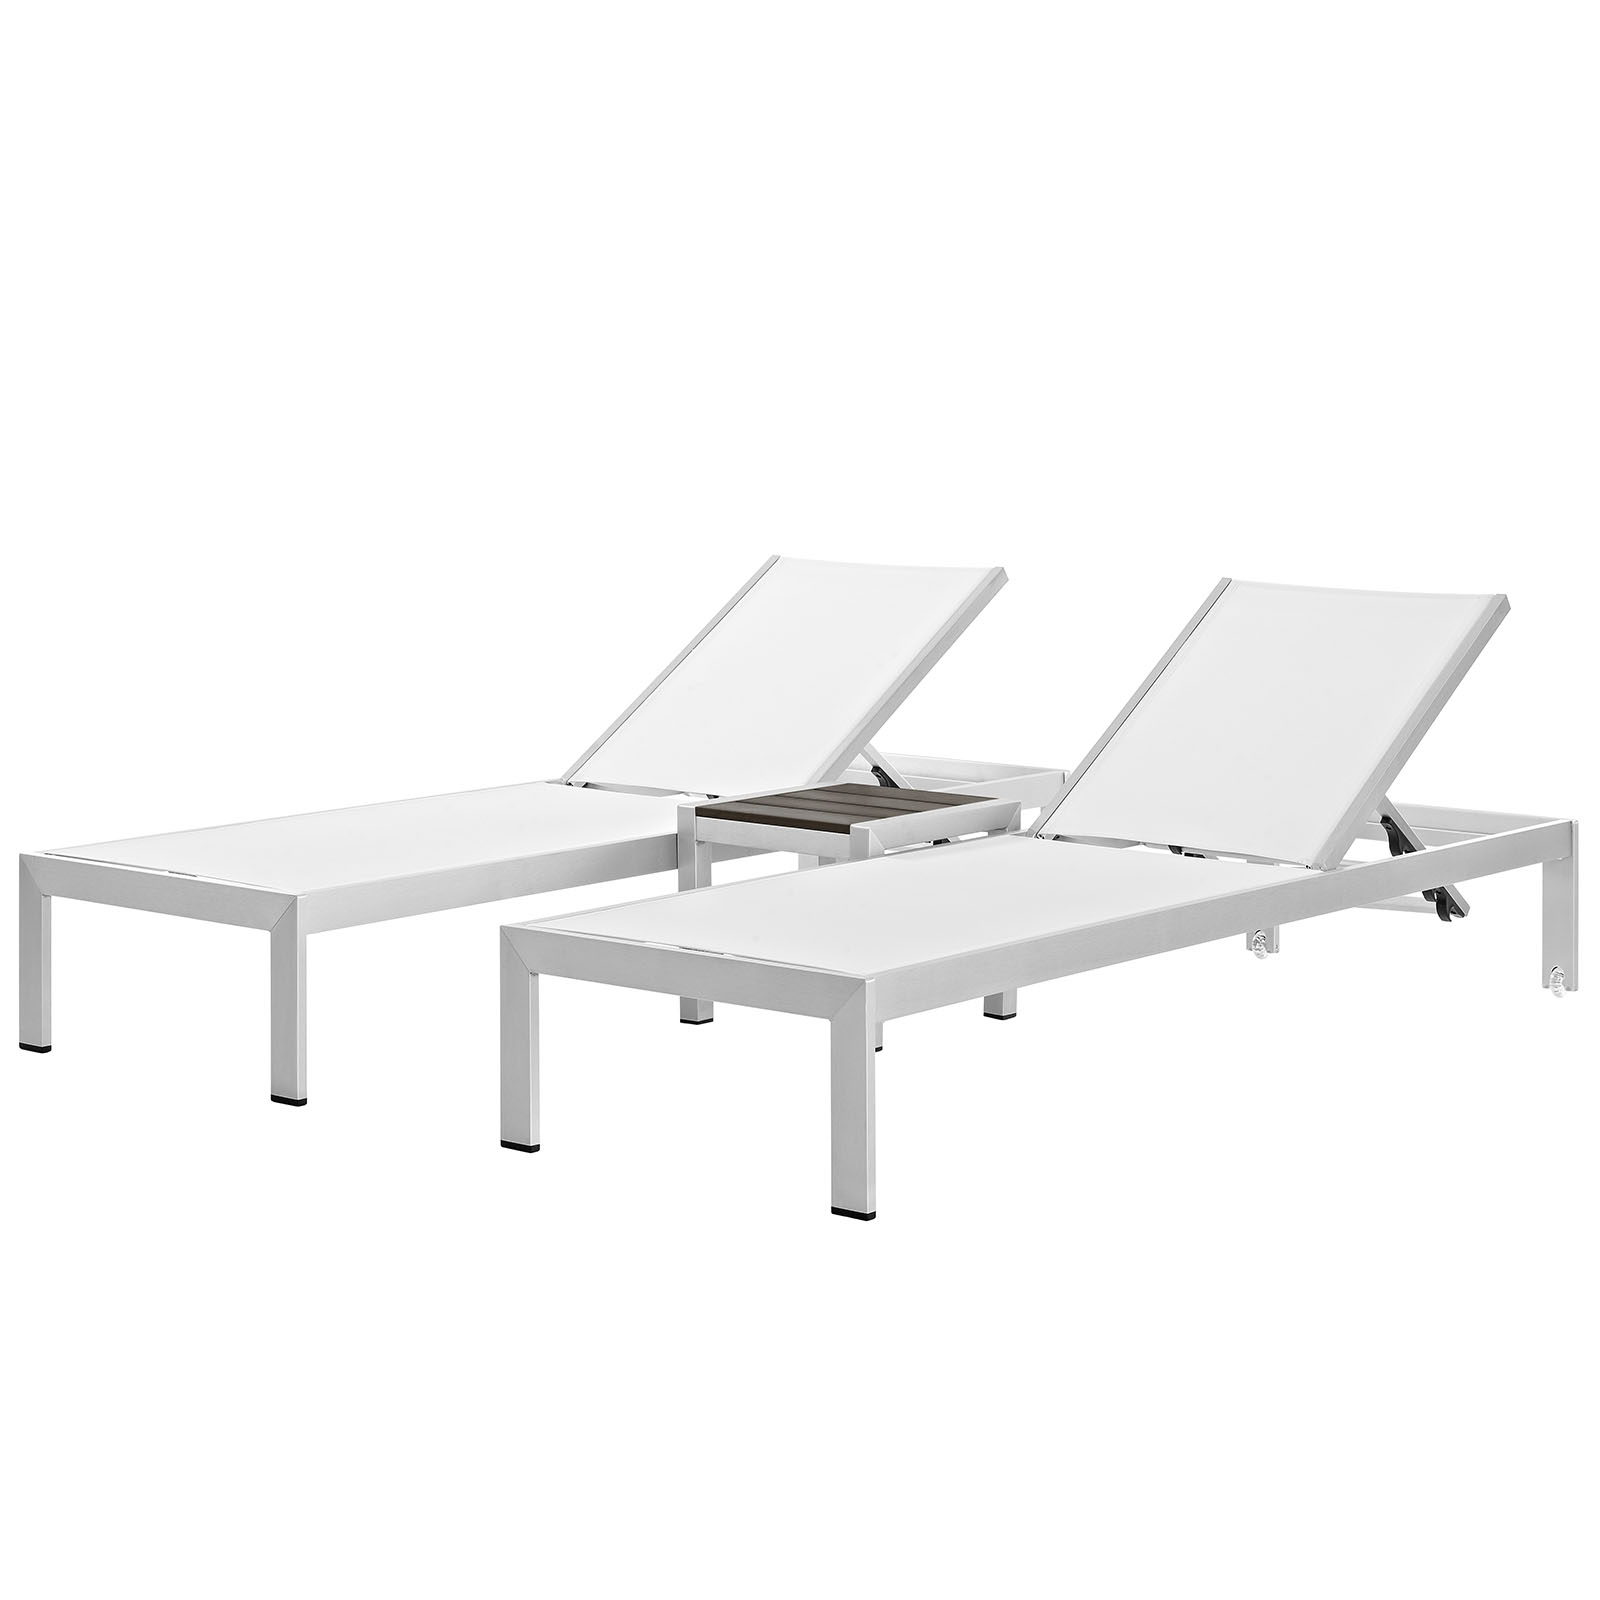 Modern Contemporary Urban Outdoor Patio Balcony Garden Furniture Lounge Chair Chaise and Side Table Set, Aluminum Metal Steel, White - image 1 of 7